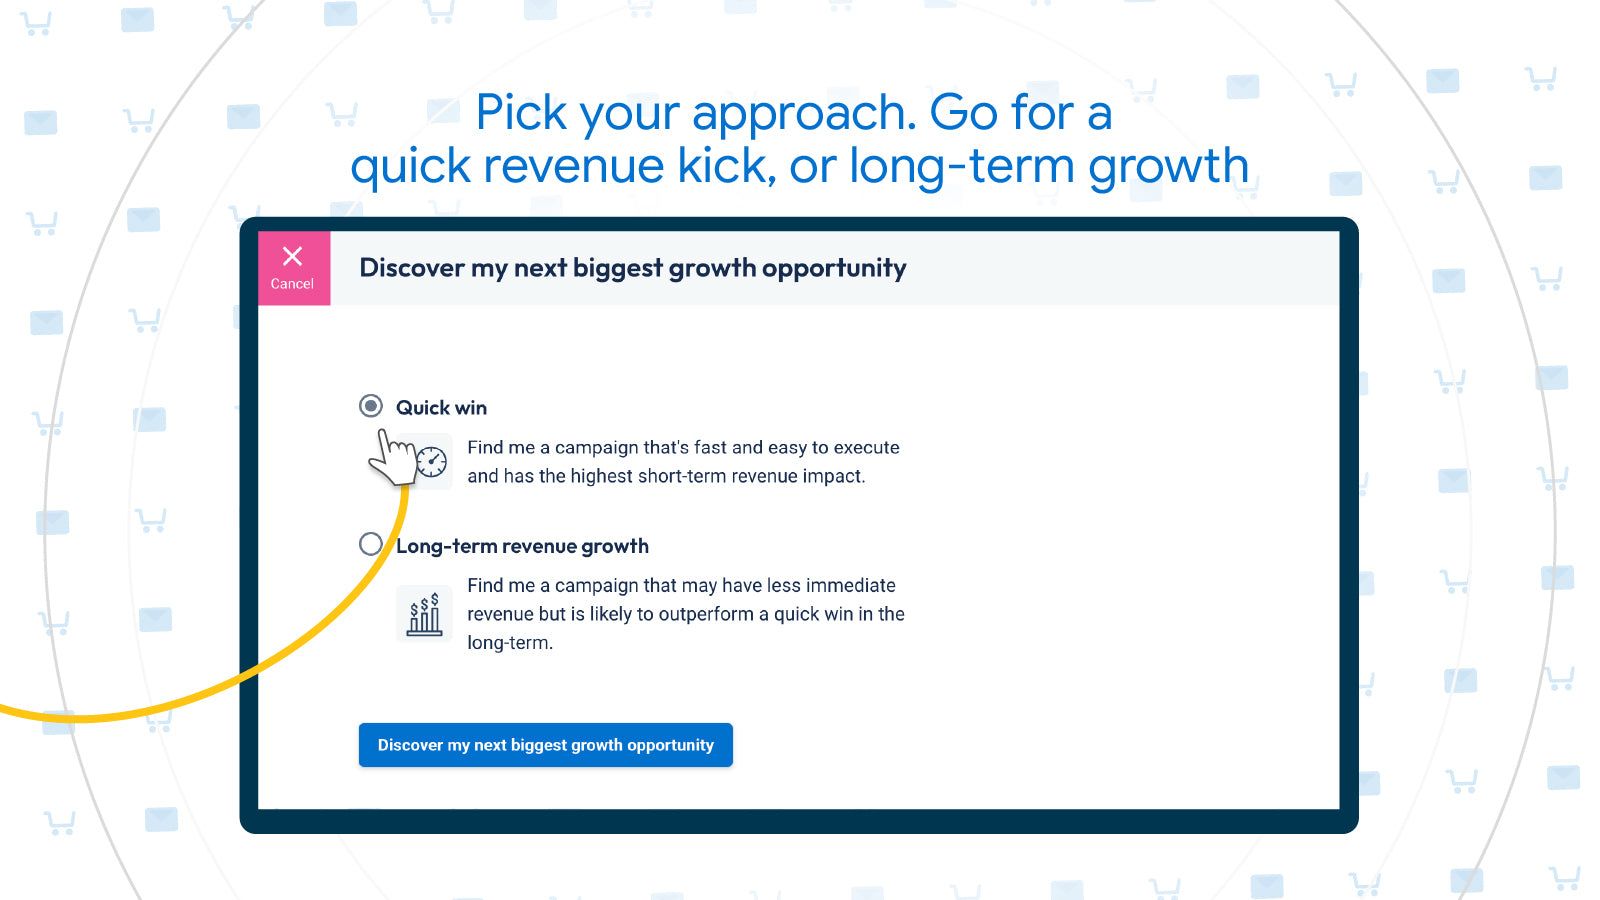 Choose between quick wins or long-term growth